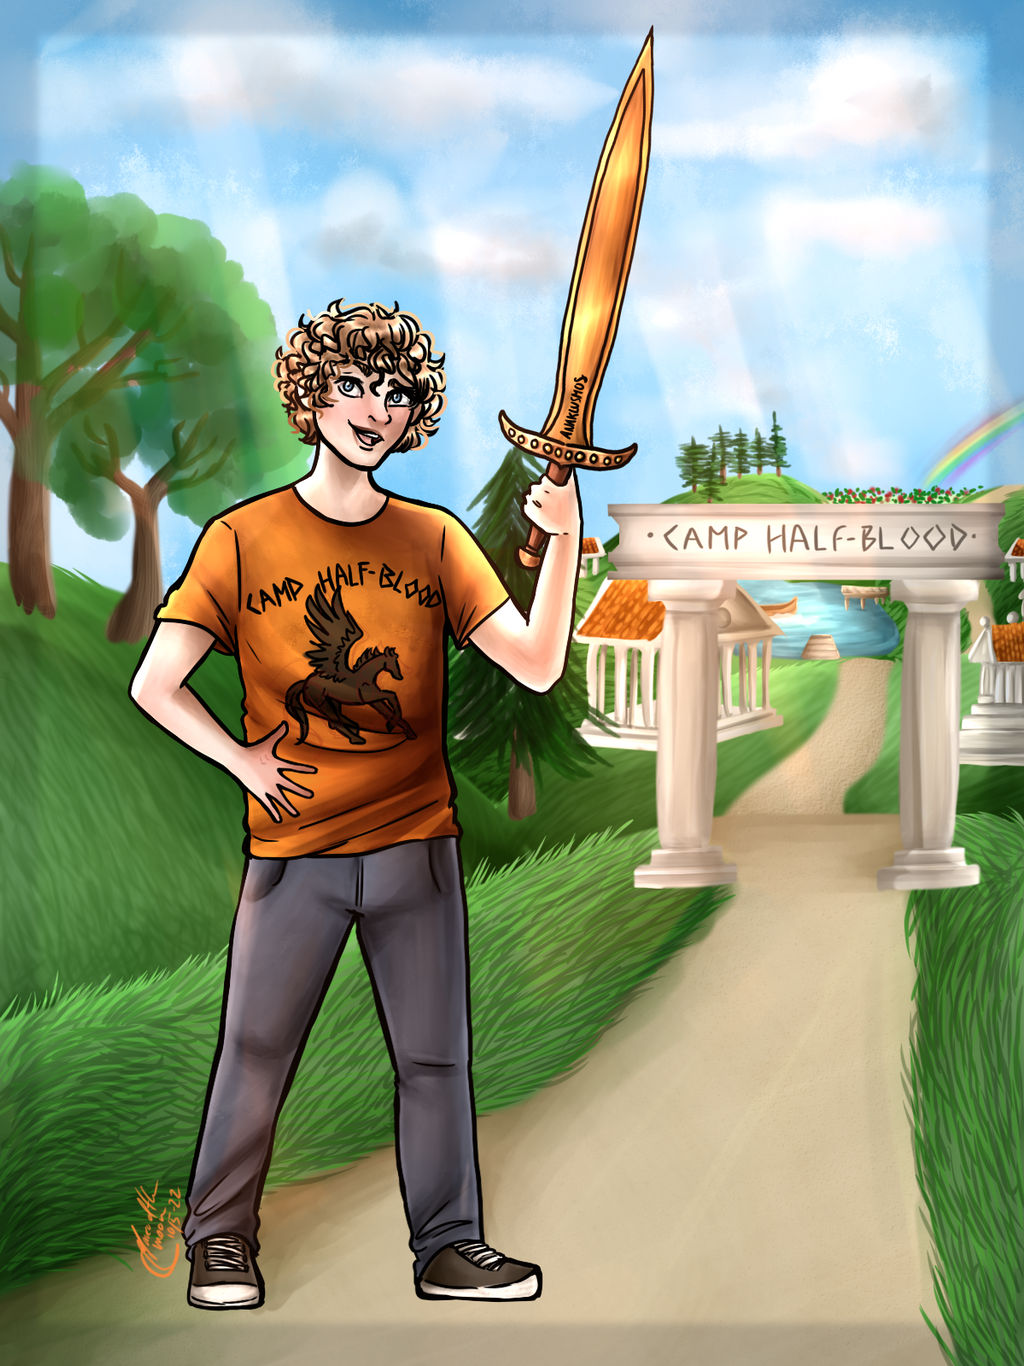 Welcome to Camp Half-Blood (Percy Jackson) by MicahandtheMoon on